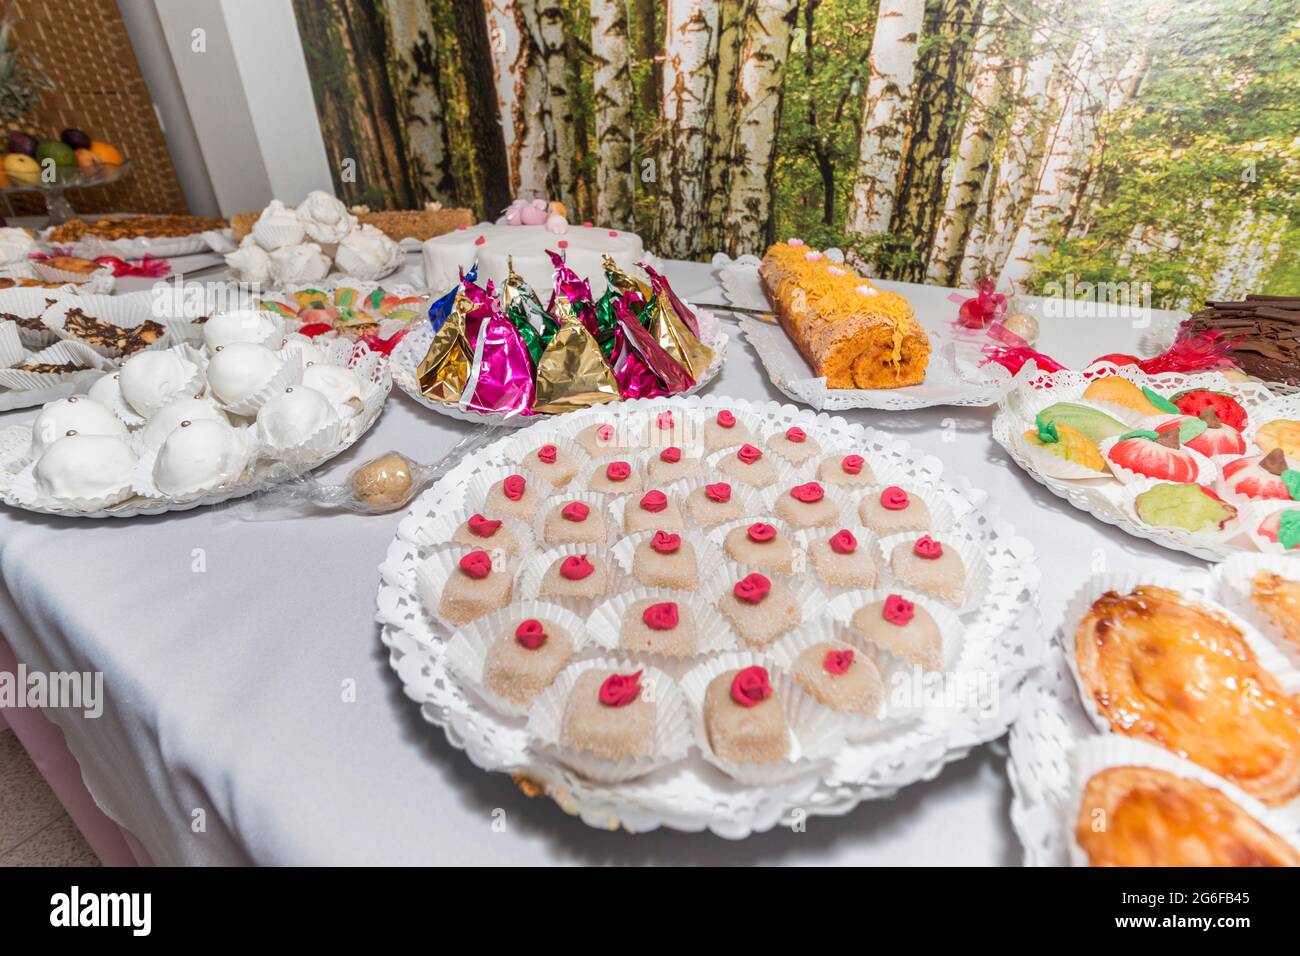 View of a diverse catering table service with lots of Portuguese food. Stock Photo